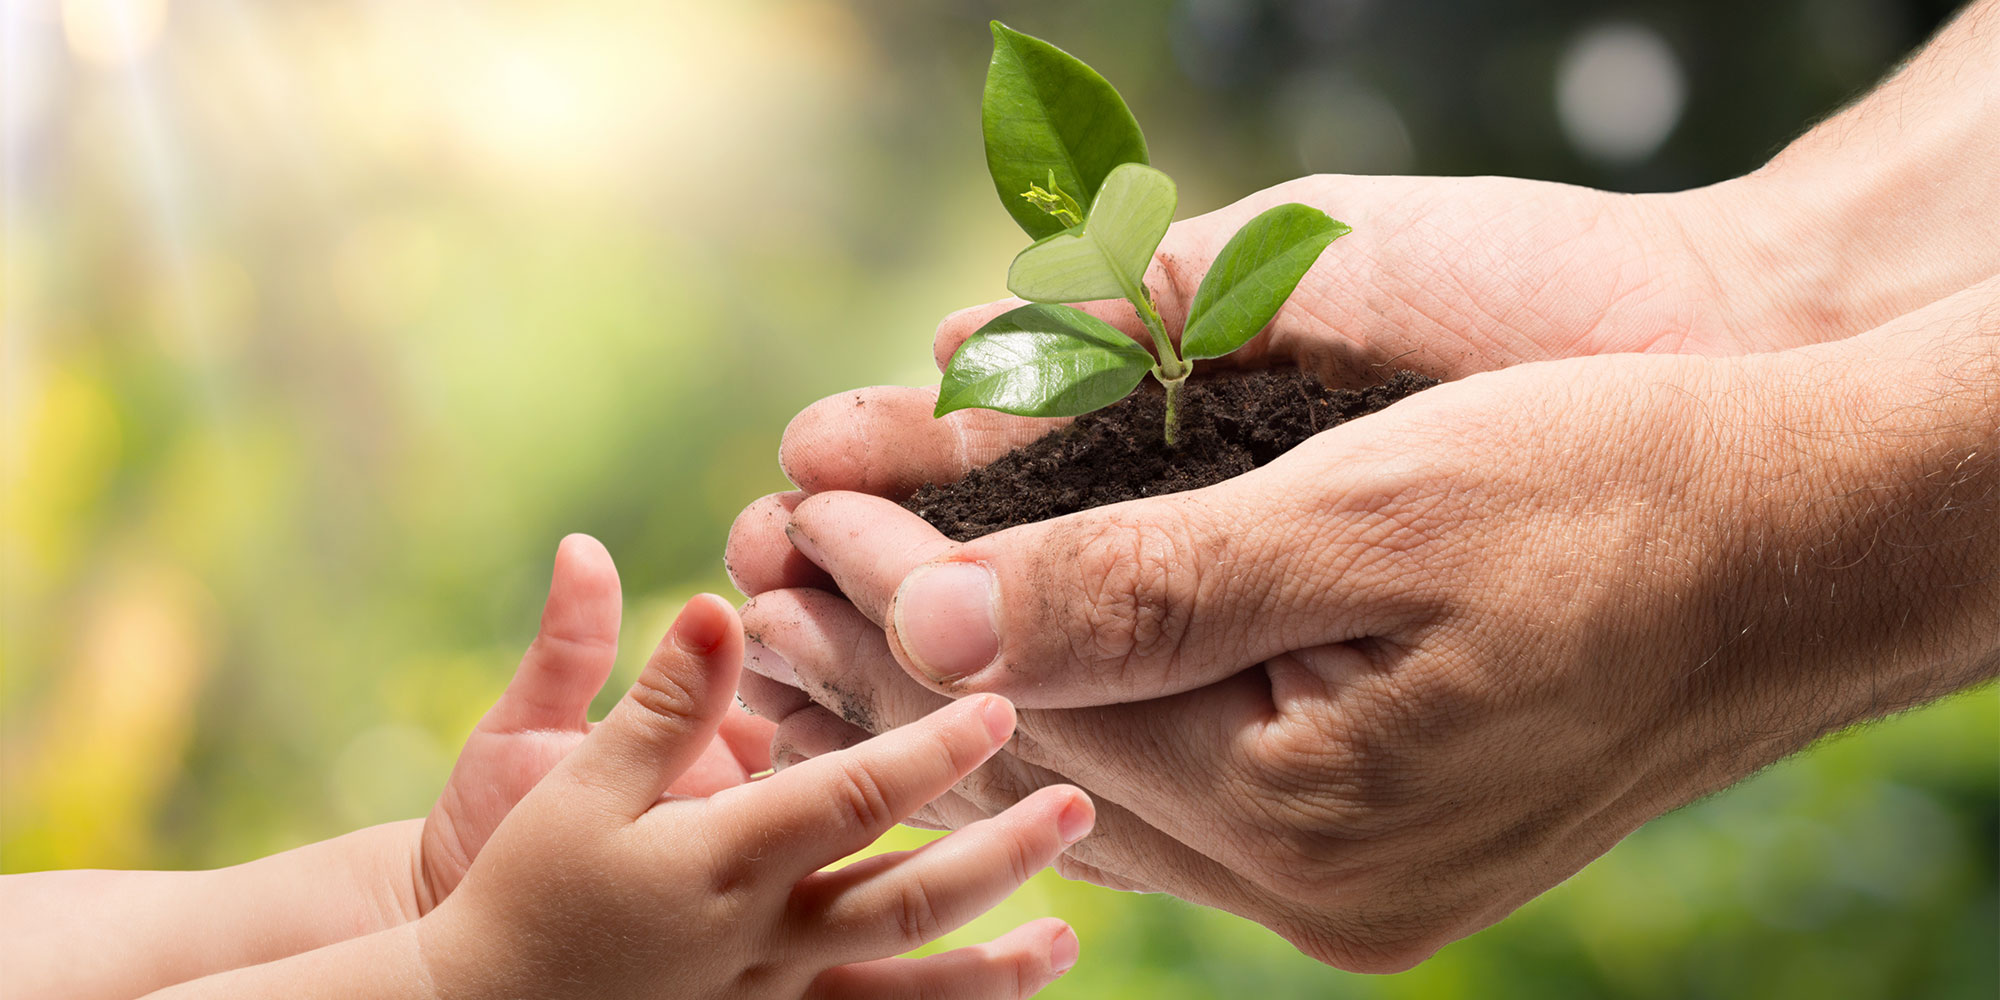 An adult's hand giving a child's hands the seeds to plant a tree to symbolize the pitfalls of reciprocity